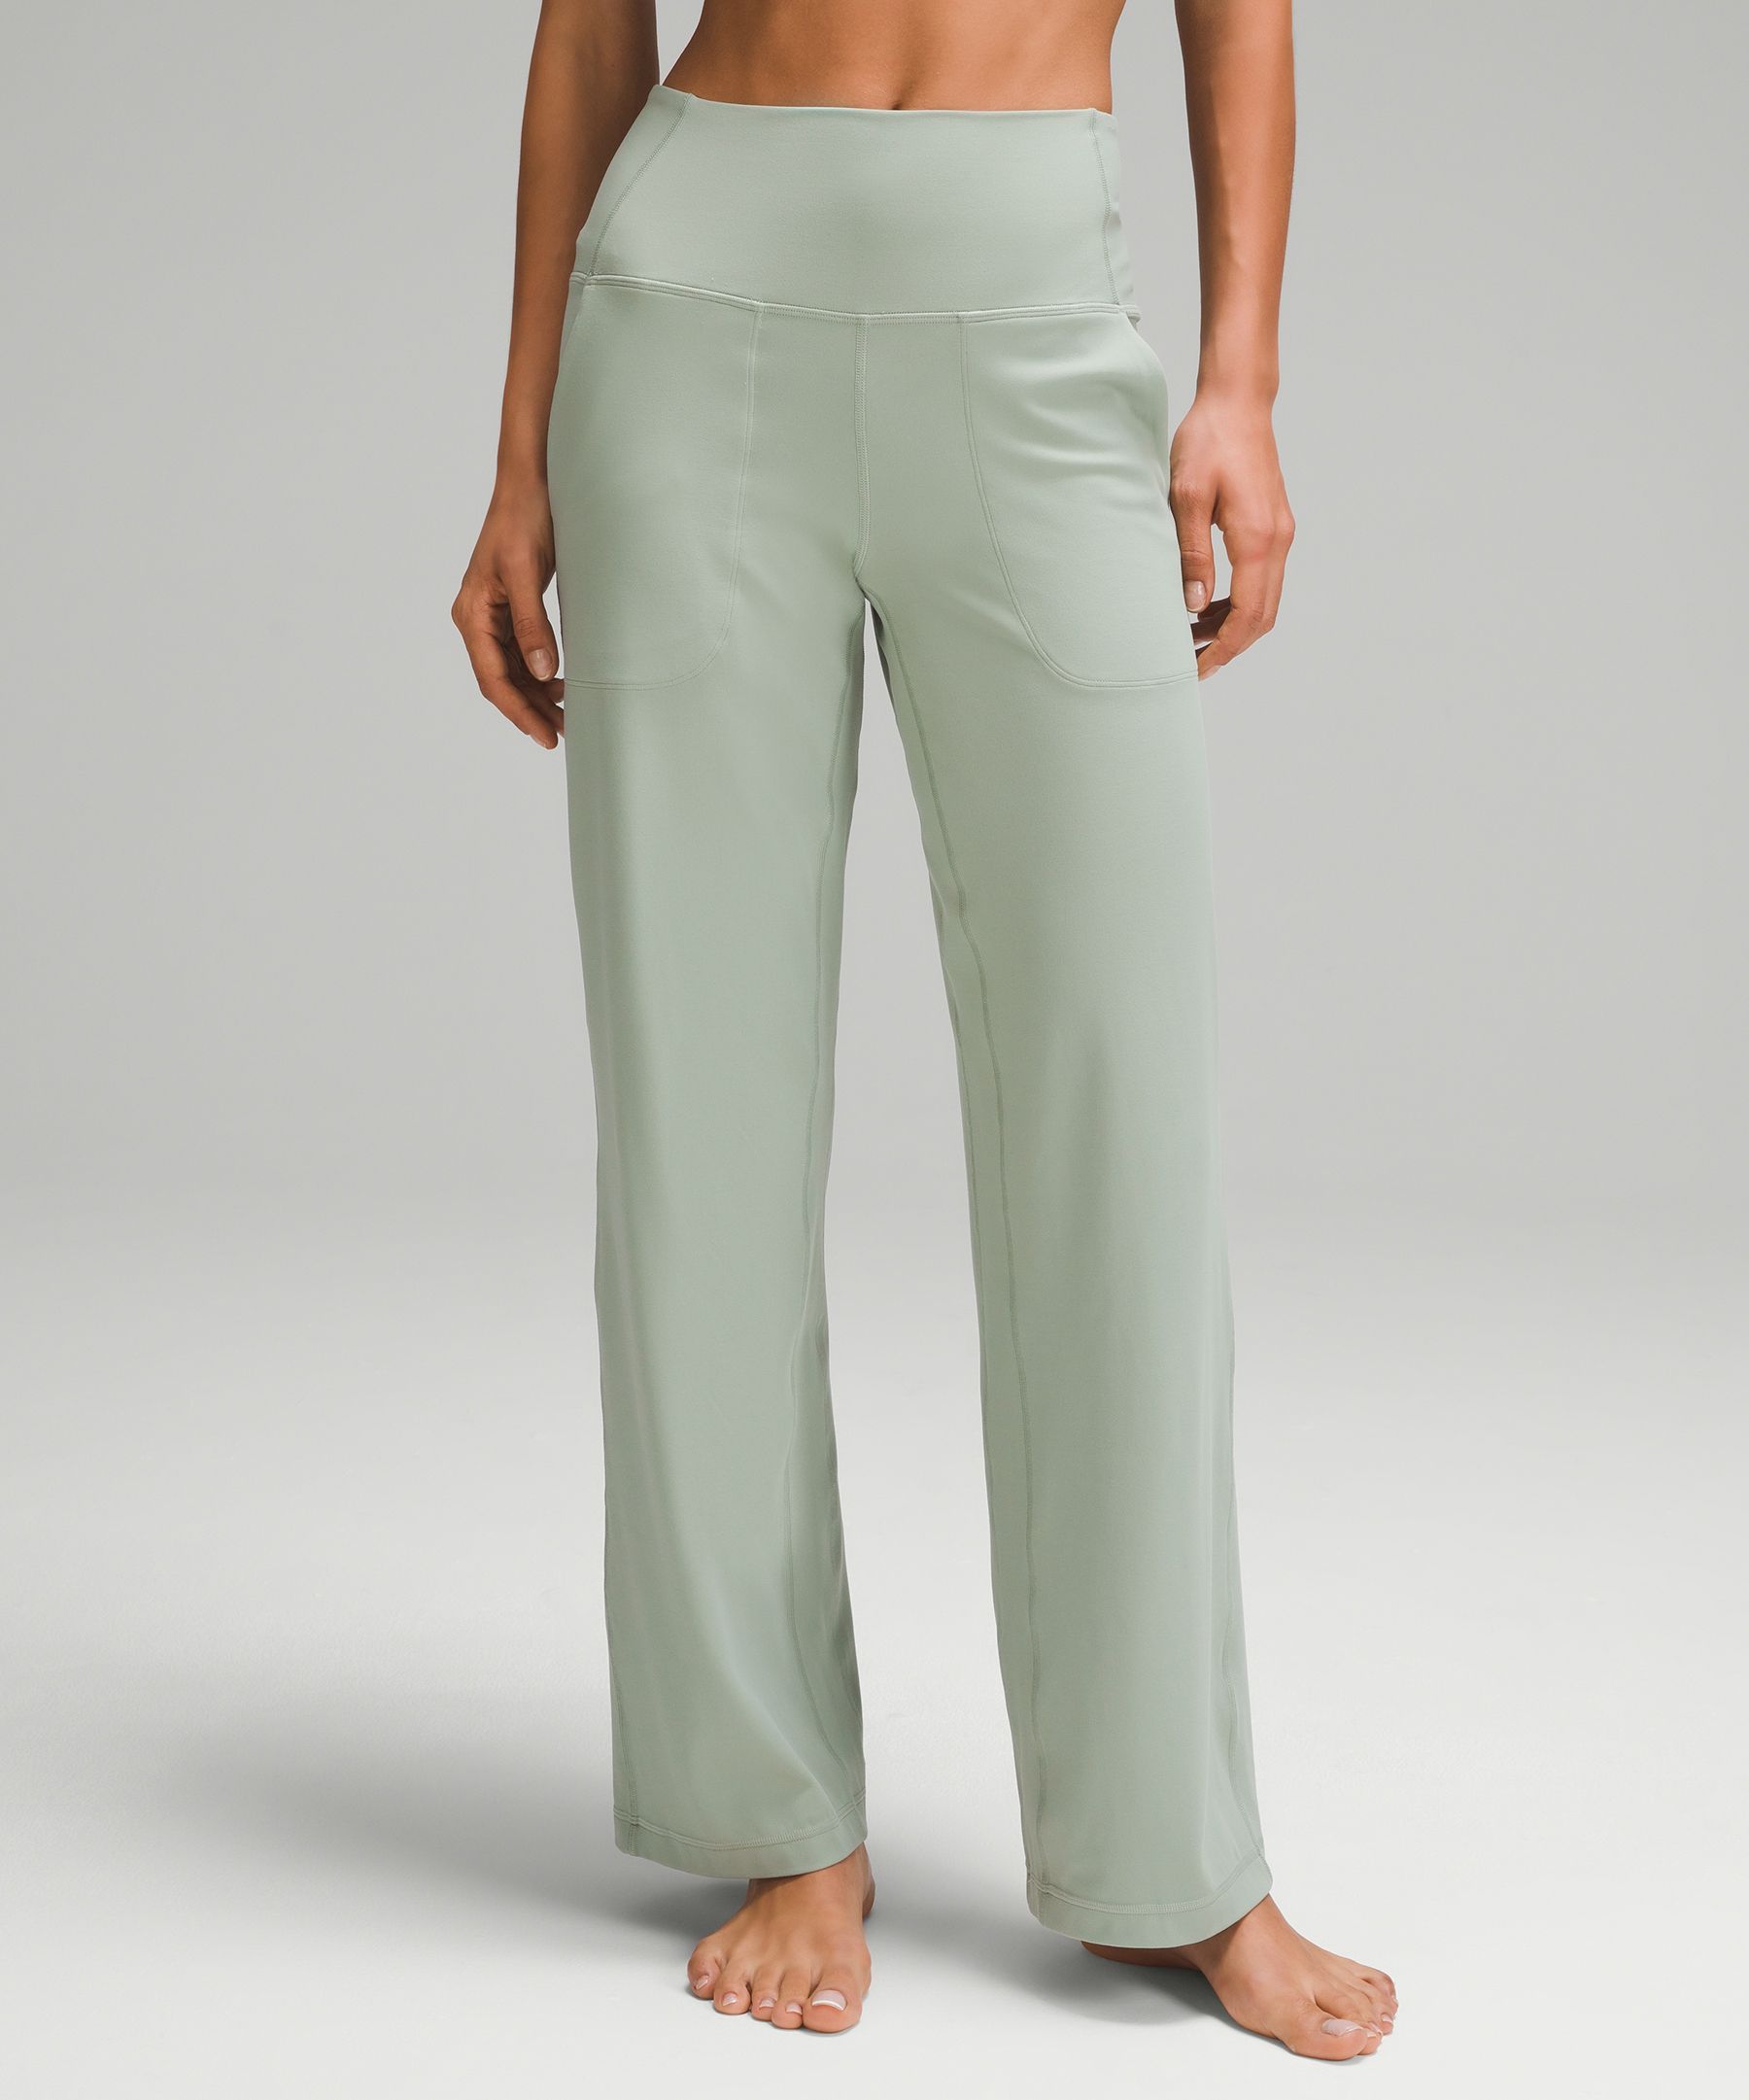 Women's High-rise Wide Leg Linen Pull-on Pants - A New Day™ Green M : Target